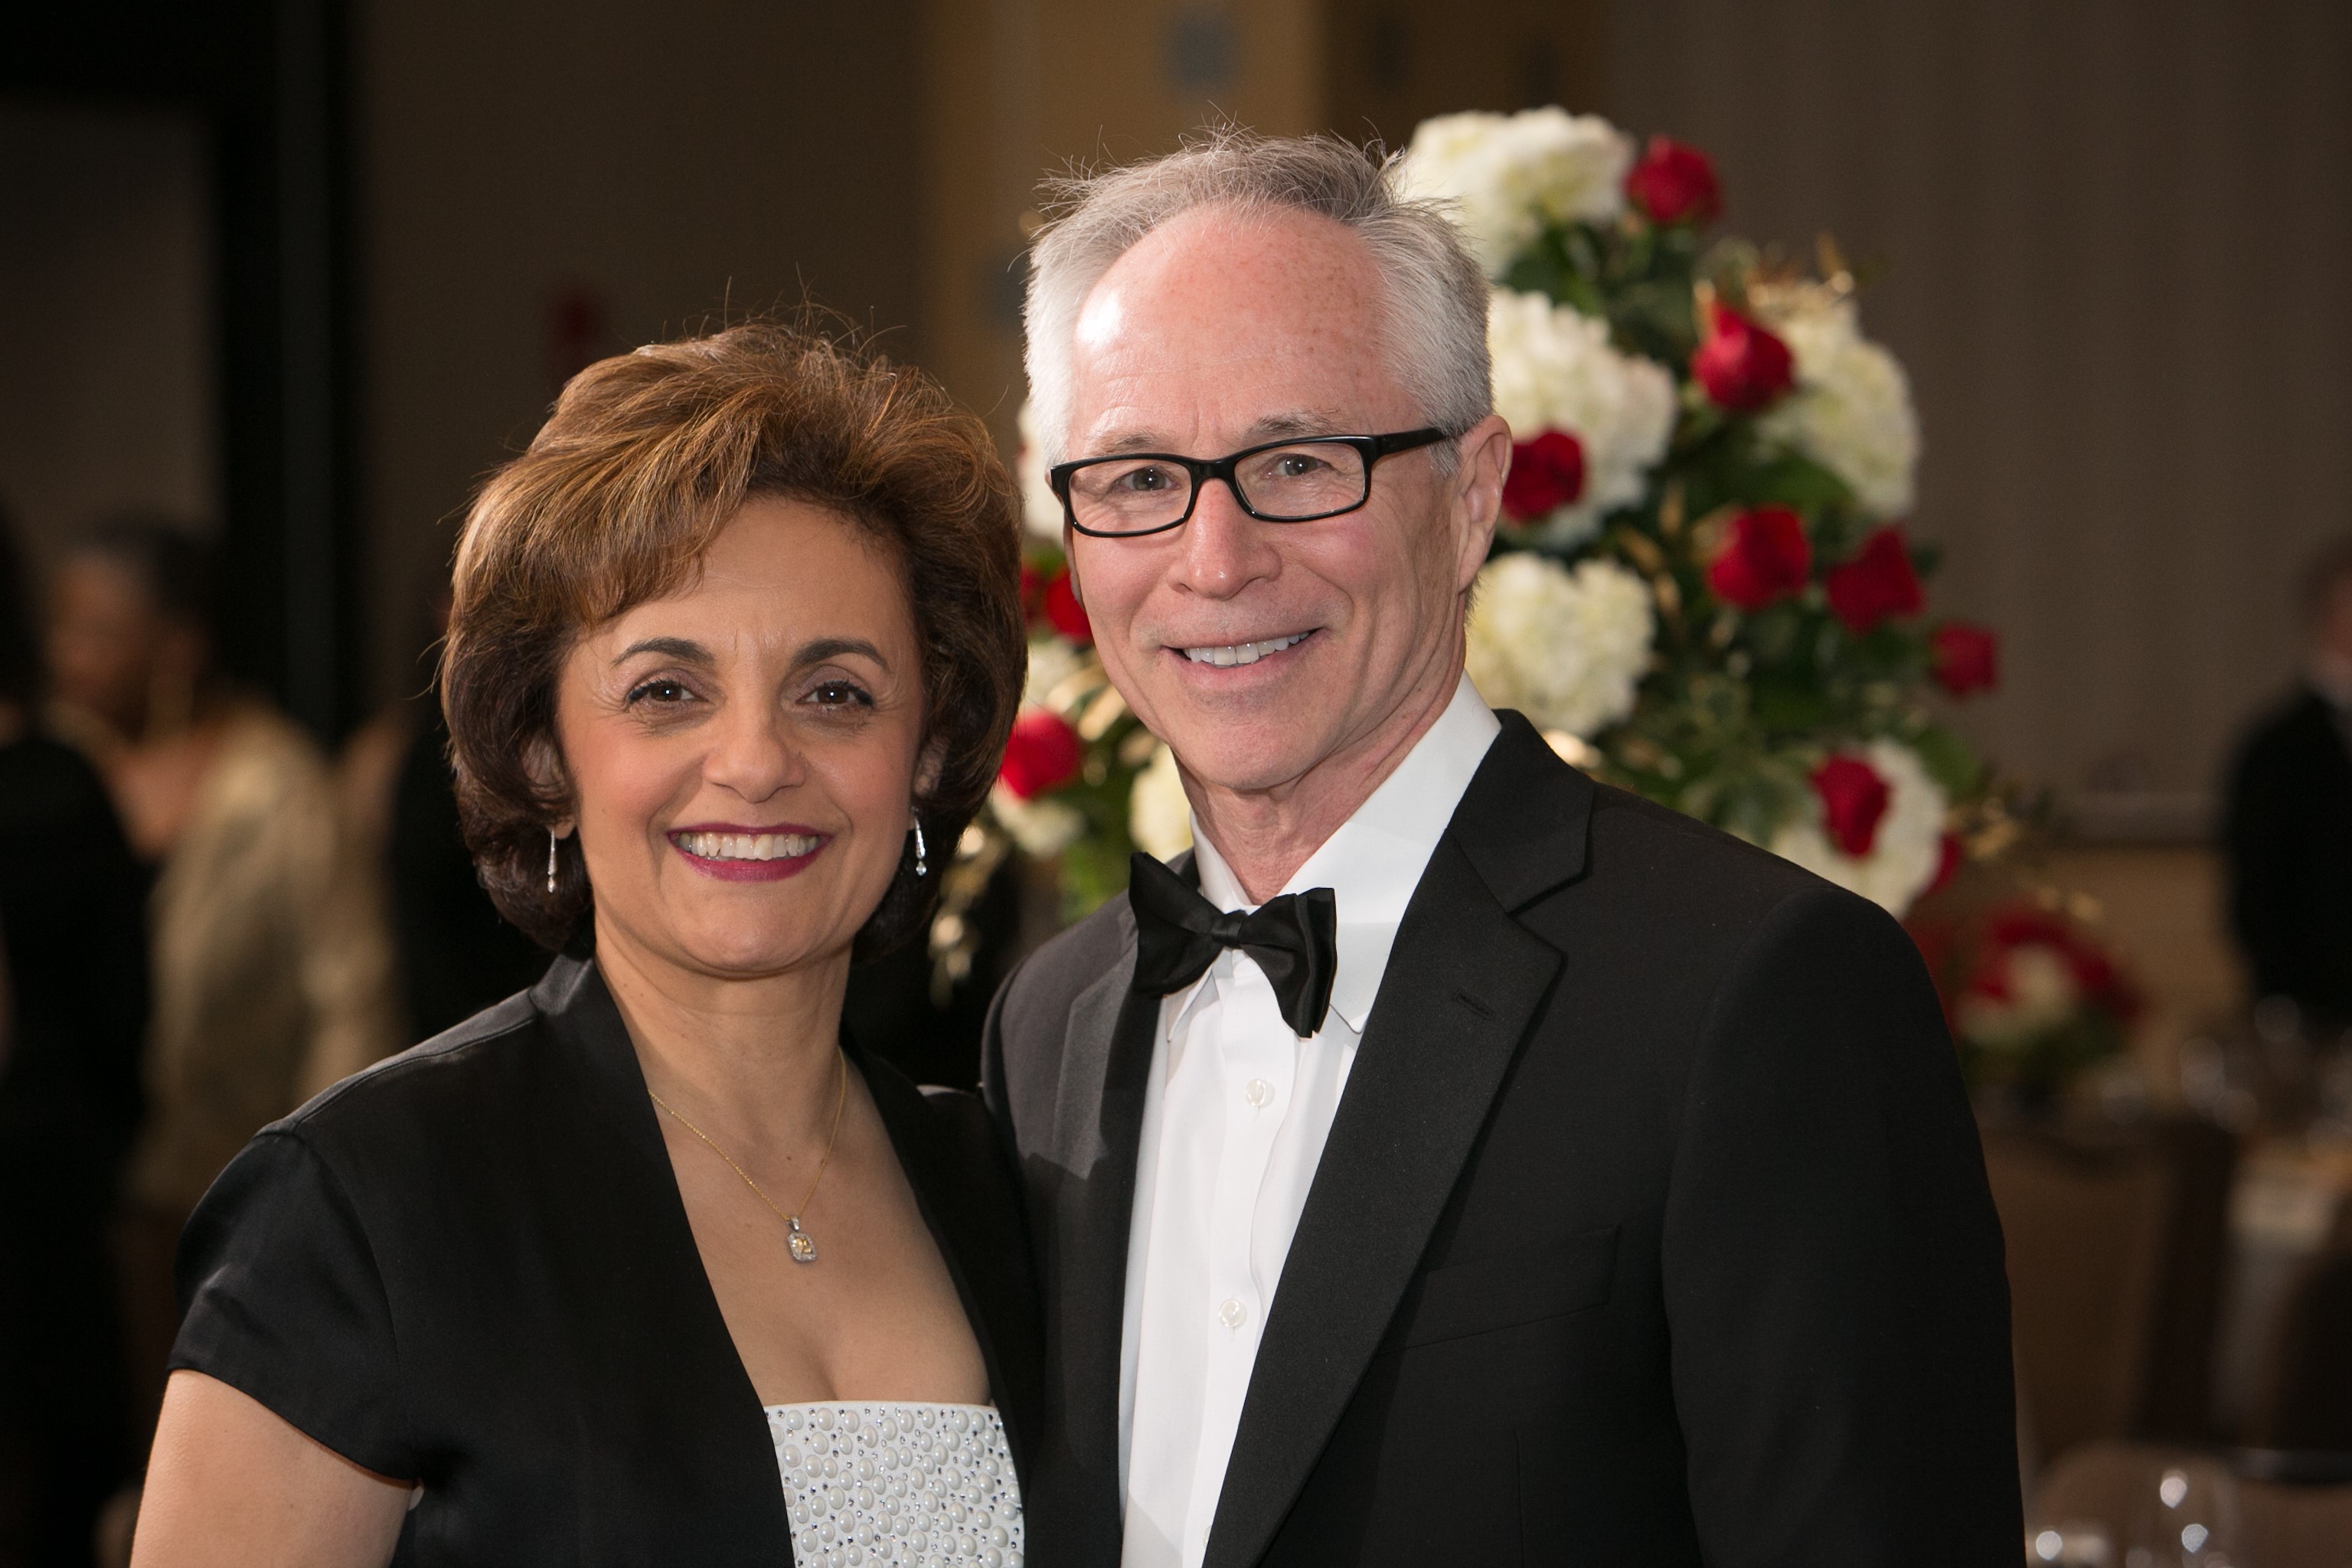 From left: Dr. Sherine Gabriel with her husband Frank. (Photo: Submitted)